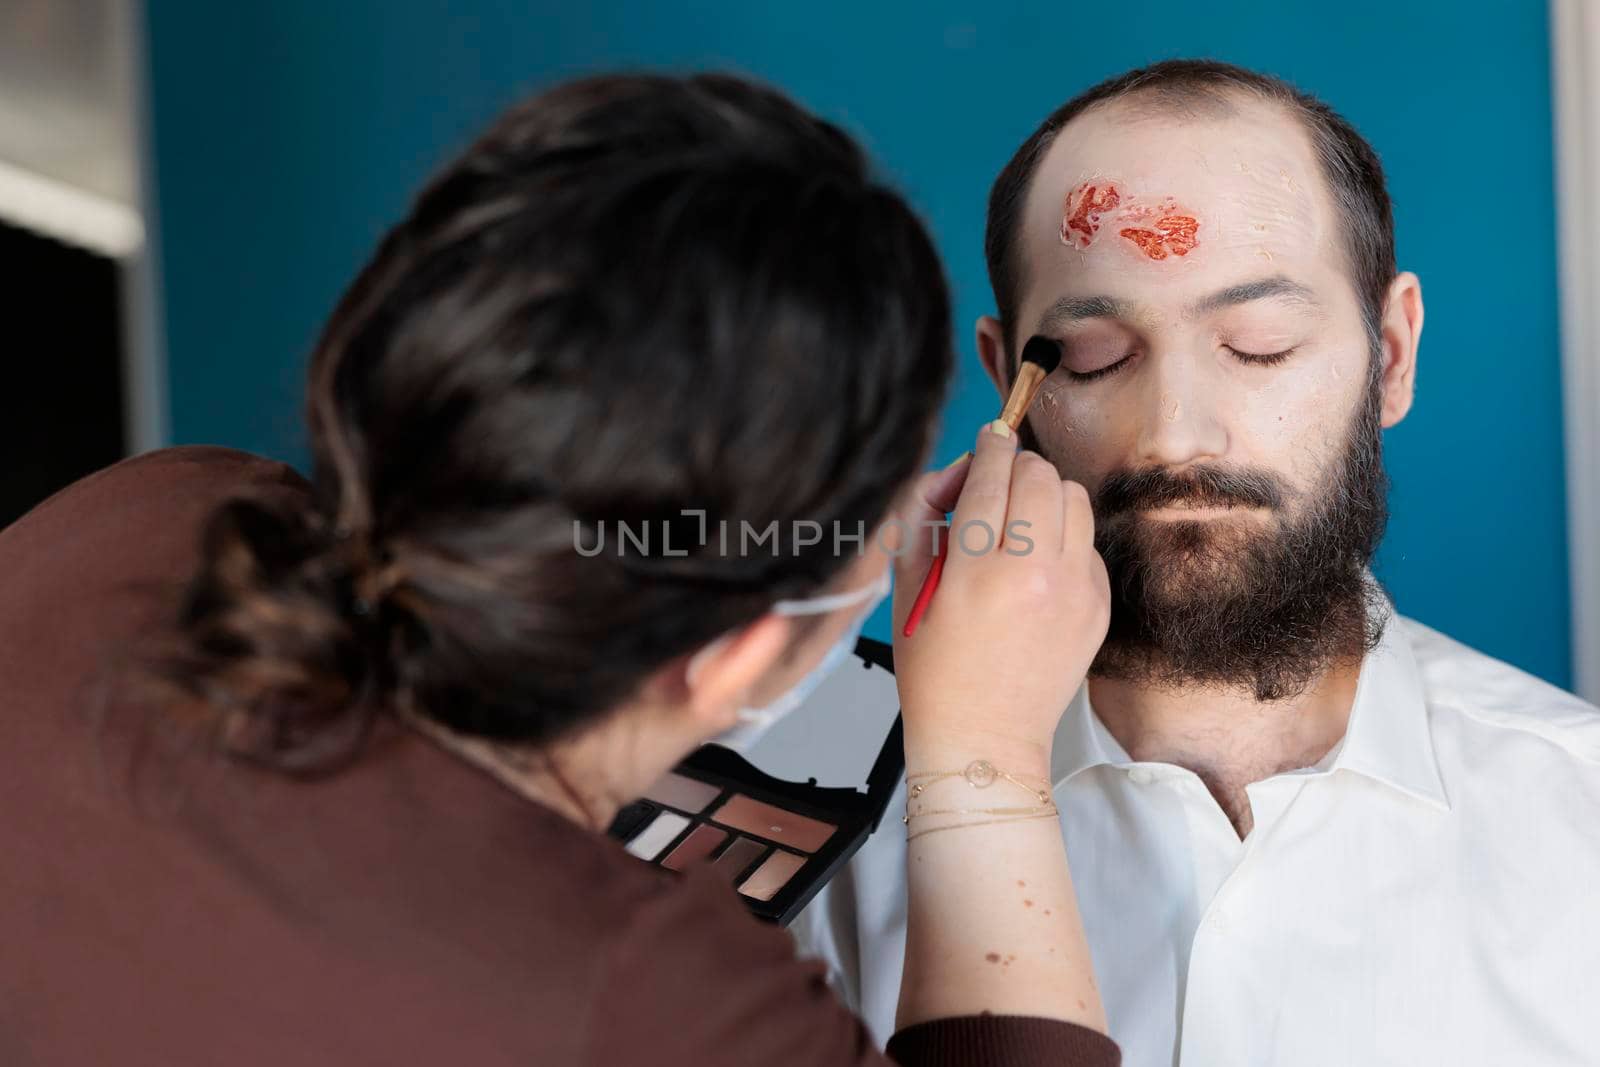 Artist using makeup effects to create zombie costume and scary dramatic corpse look. Man looking deceased and infected after having bloody scars and monster face, creepy design.